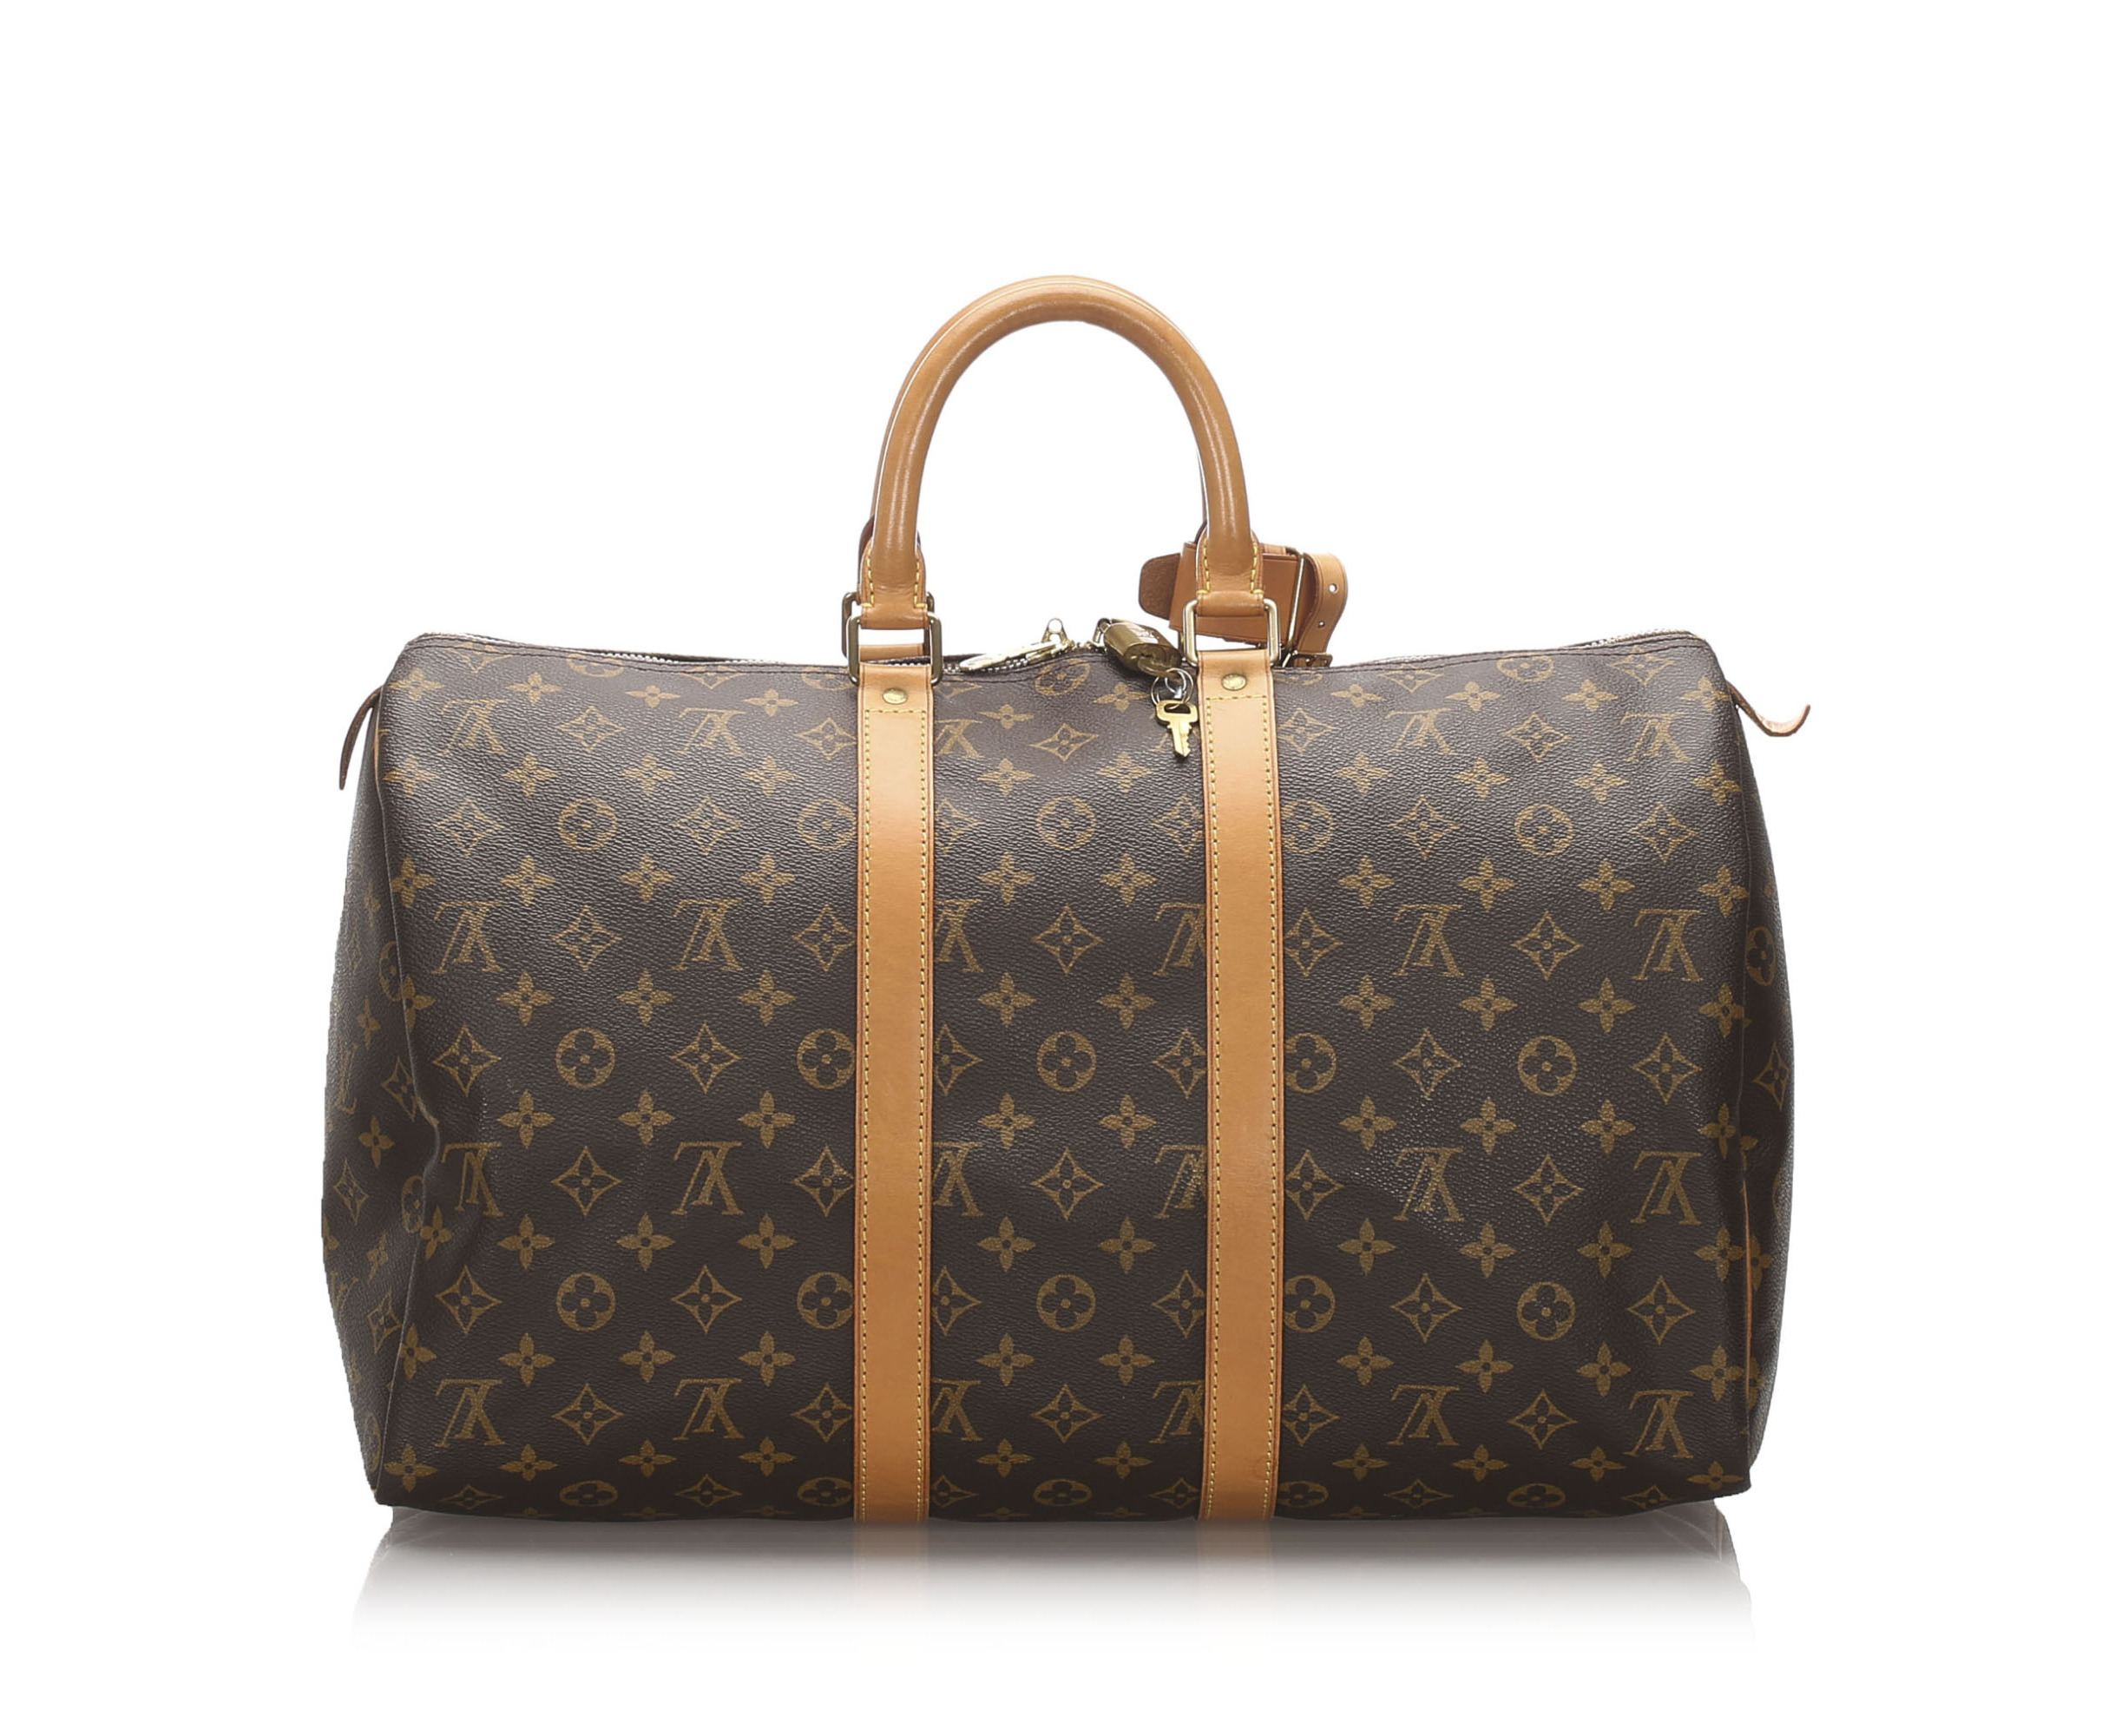 The New Louis Vuitton Airplane Baggage Policy